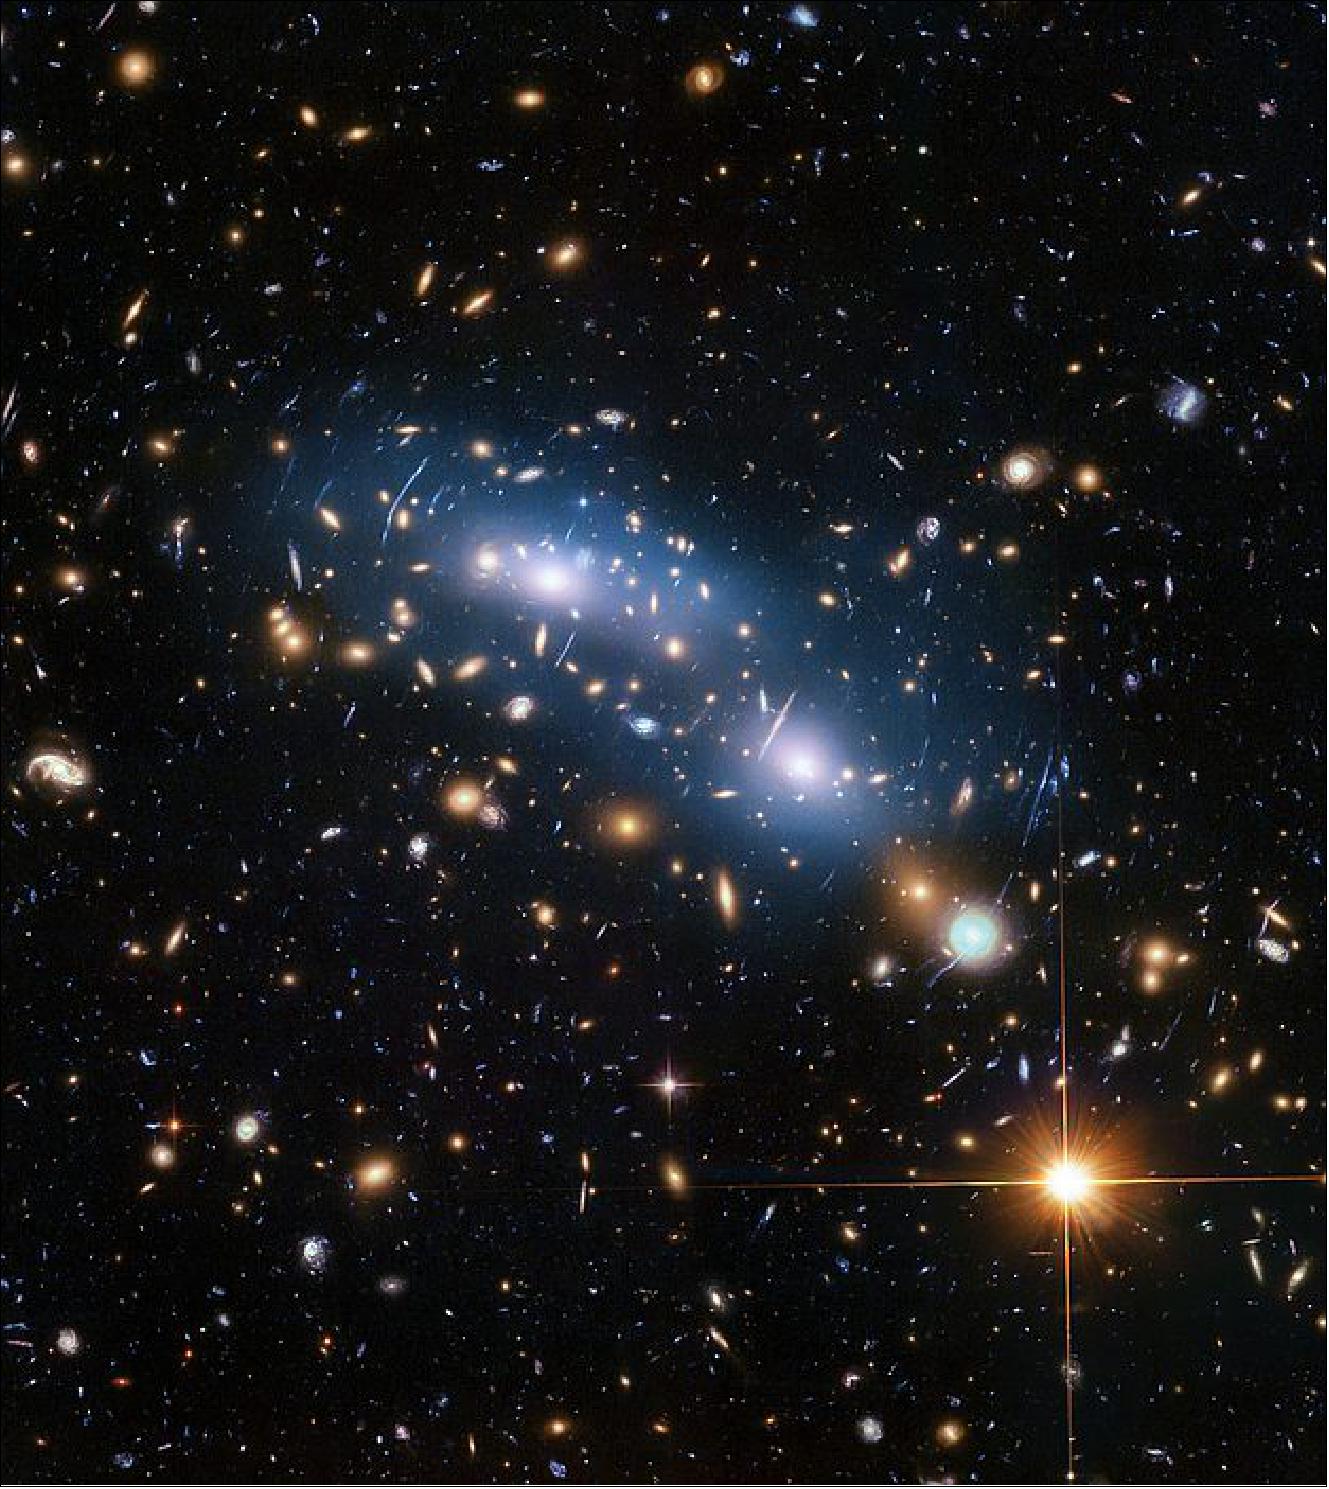 Figure 56: This image from the NASA/ESA Hubble Space Telescope shows the galaxy cluster MACS J0416. This is one of six being studied by the Hubble Frontier Fields program, which together have produced the deepest images of gravitational lensing ever made. Scientists used intracluster light (visible in blue) to study the distribution of dark matter within the cluster [image credit: NASA, ESA, and M. Montes (University of New South Wales, Sydney, Australia)]